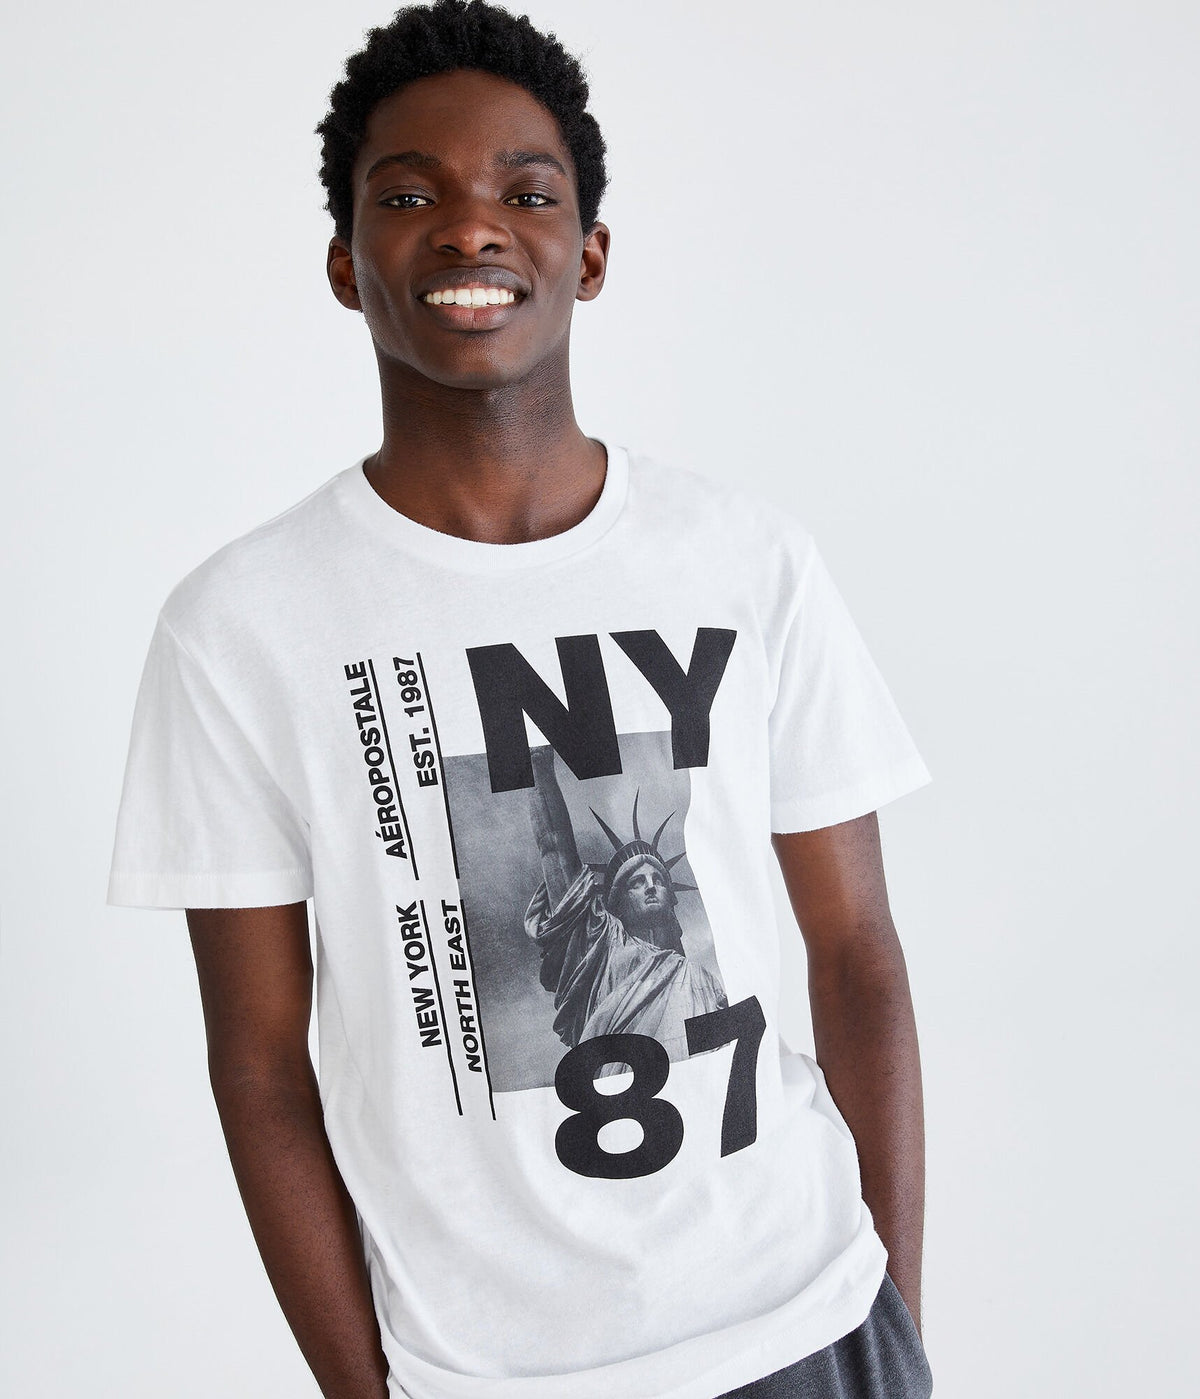 Aeropostale Mens' Statue of Liberty Graphic Tee - White - Size XS - Cotton - Teen Fashion & Clothing Bleach